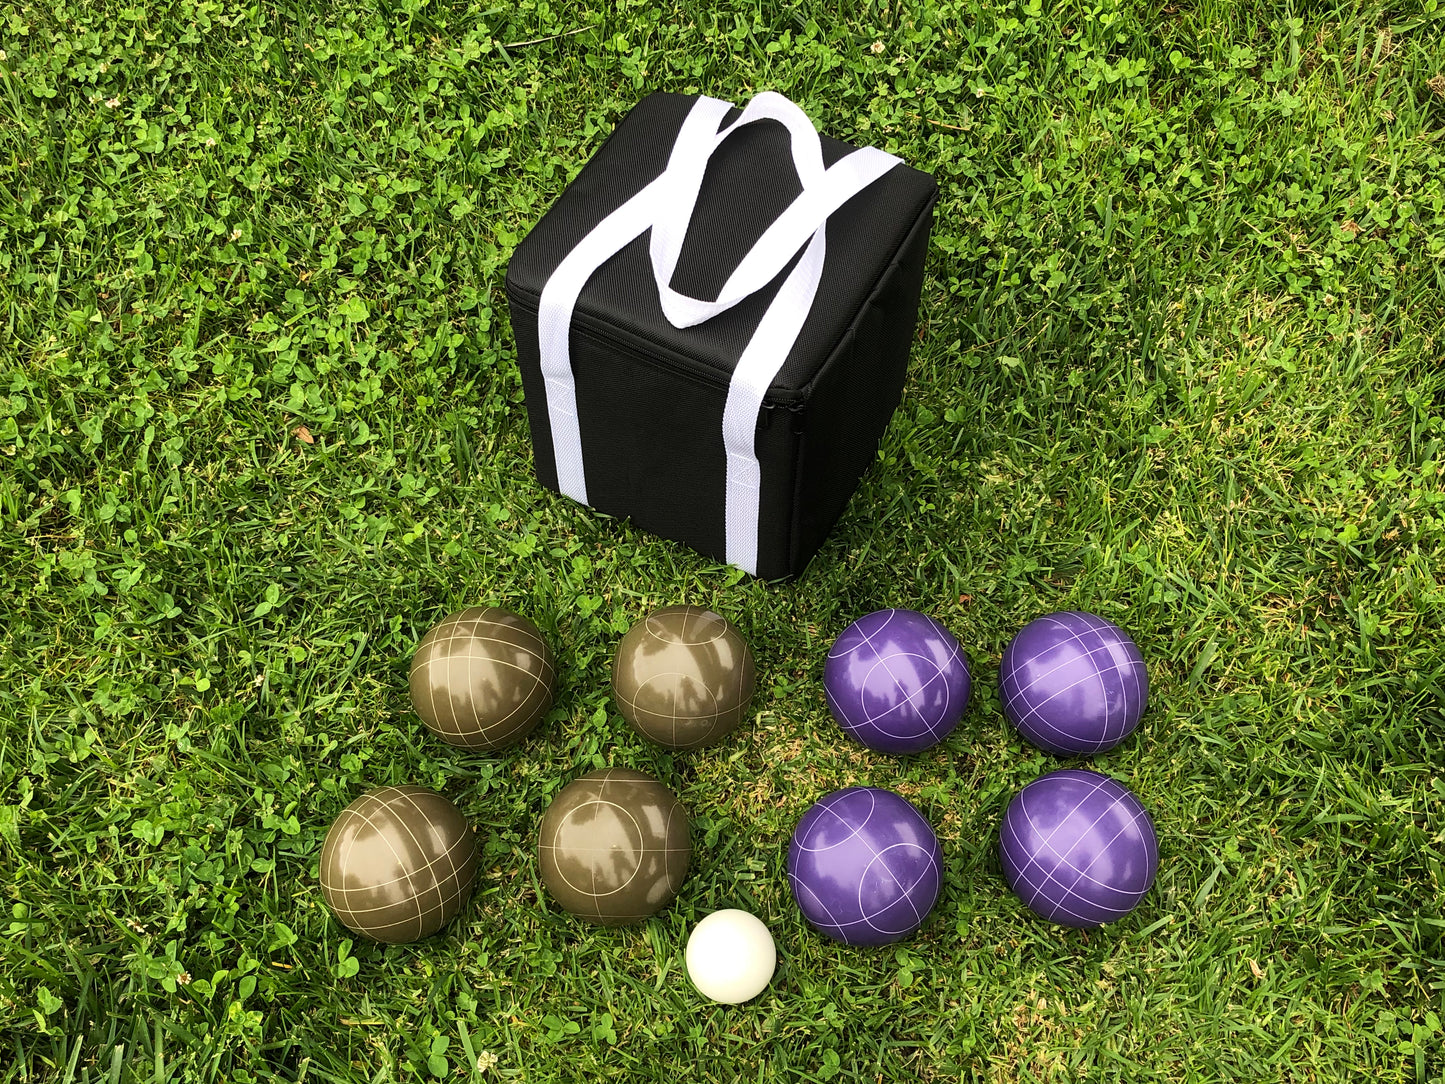 107mm Bocce Olive Brown and Purple Balls with Black Bag